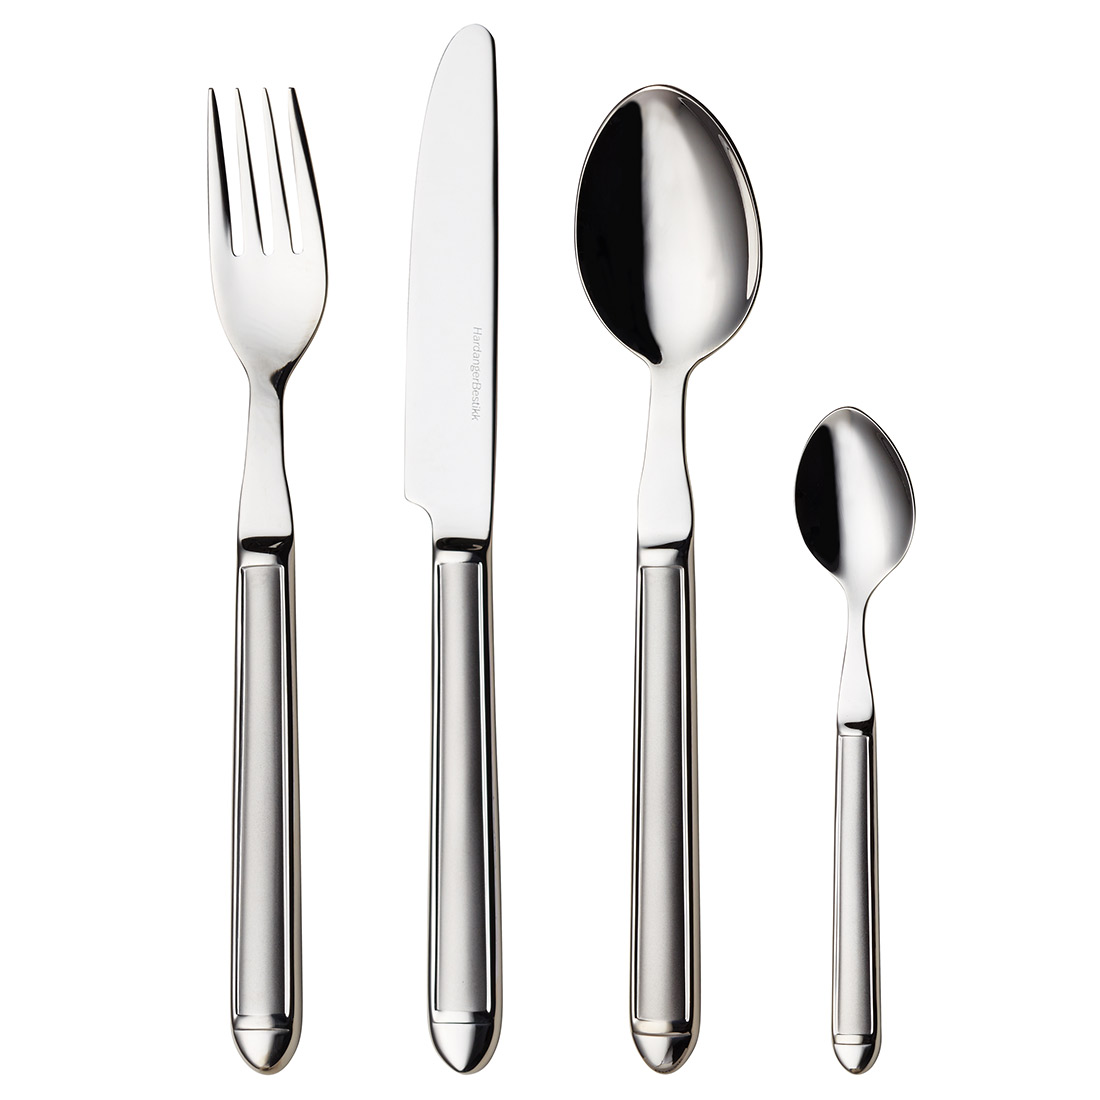 Nora cutlery set product image